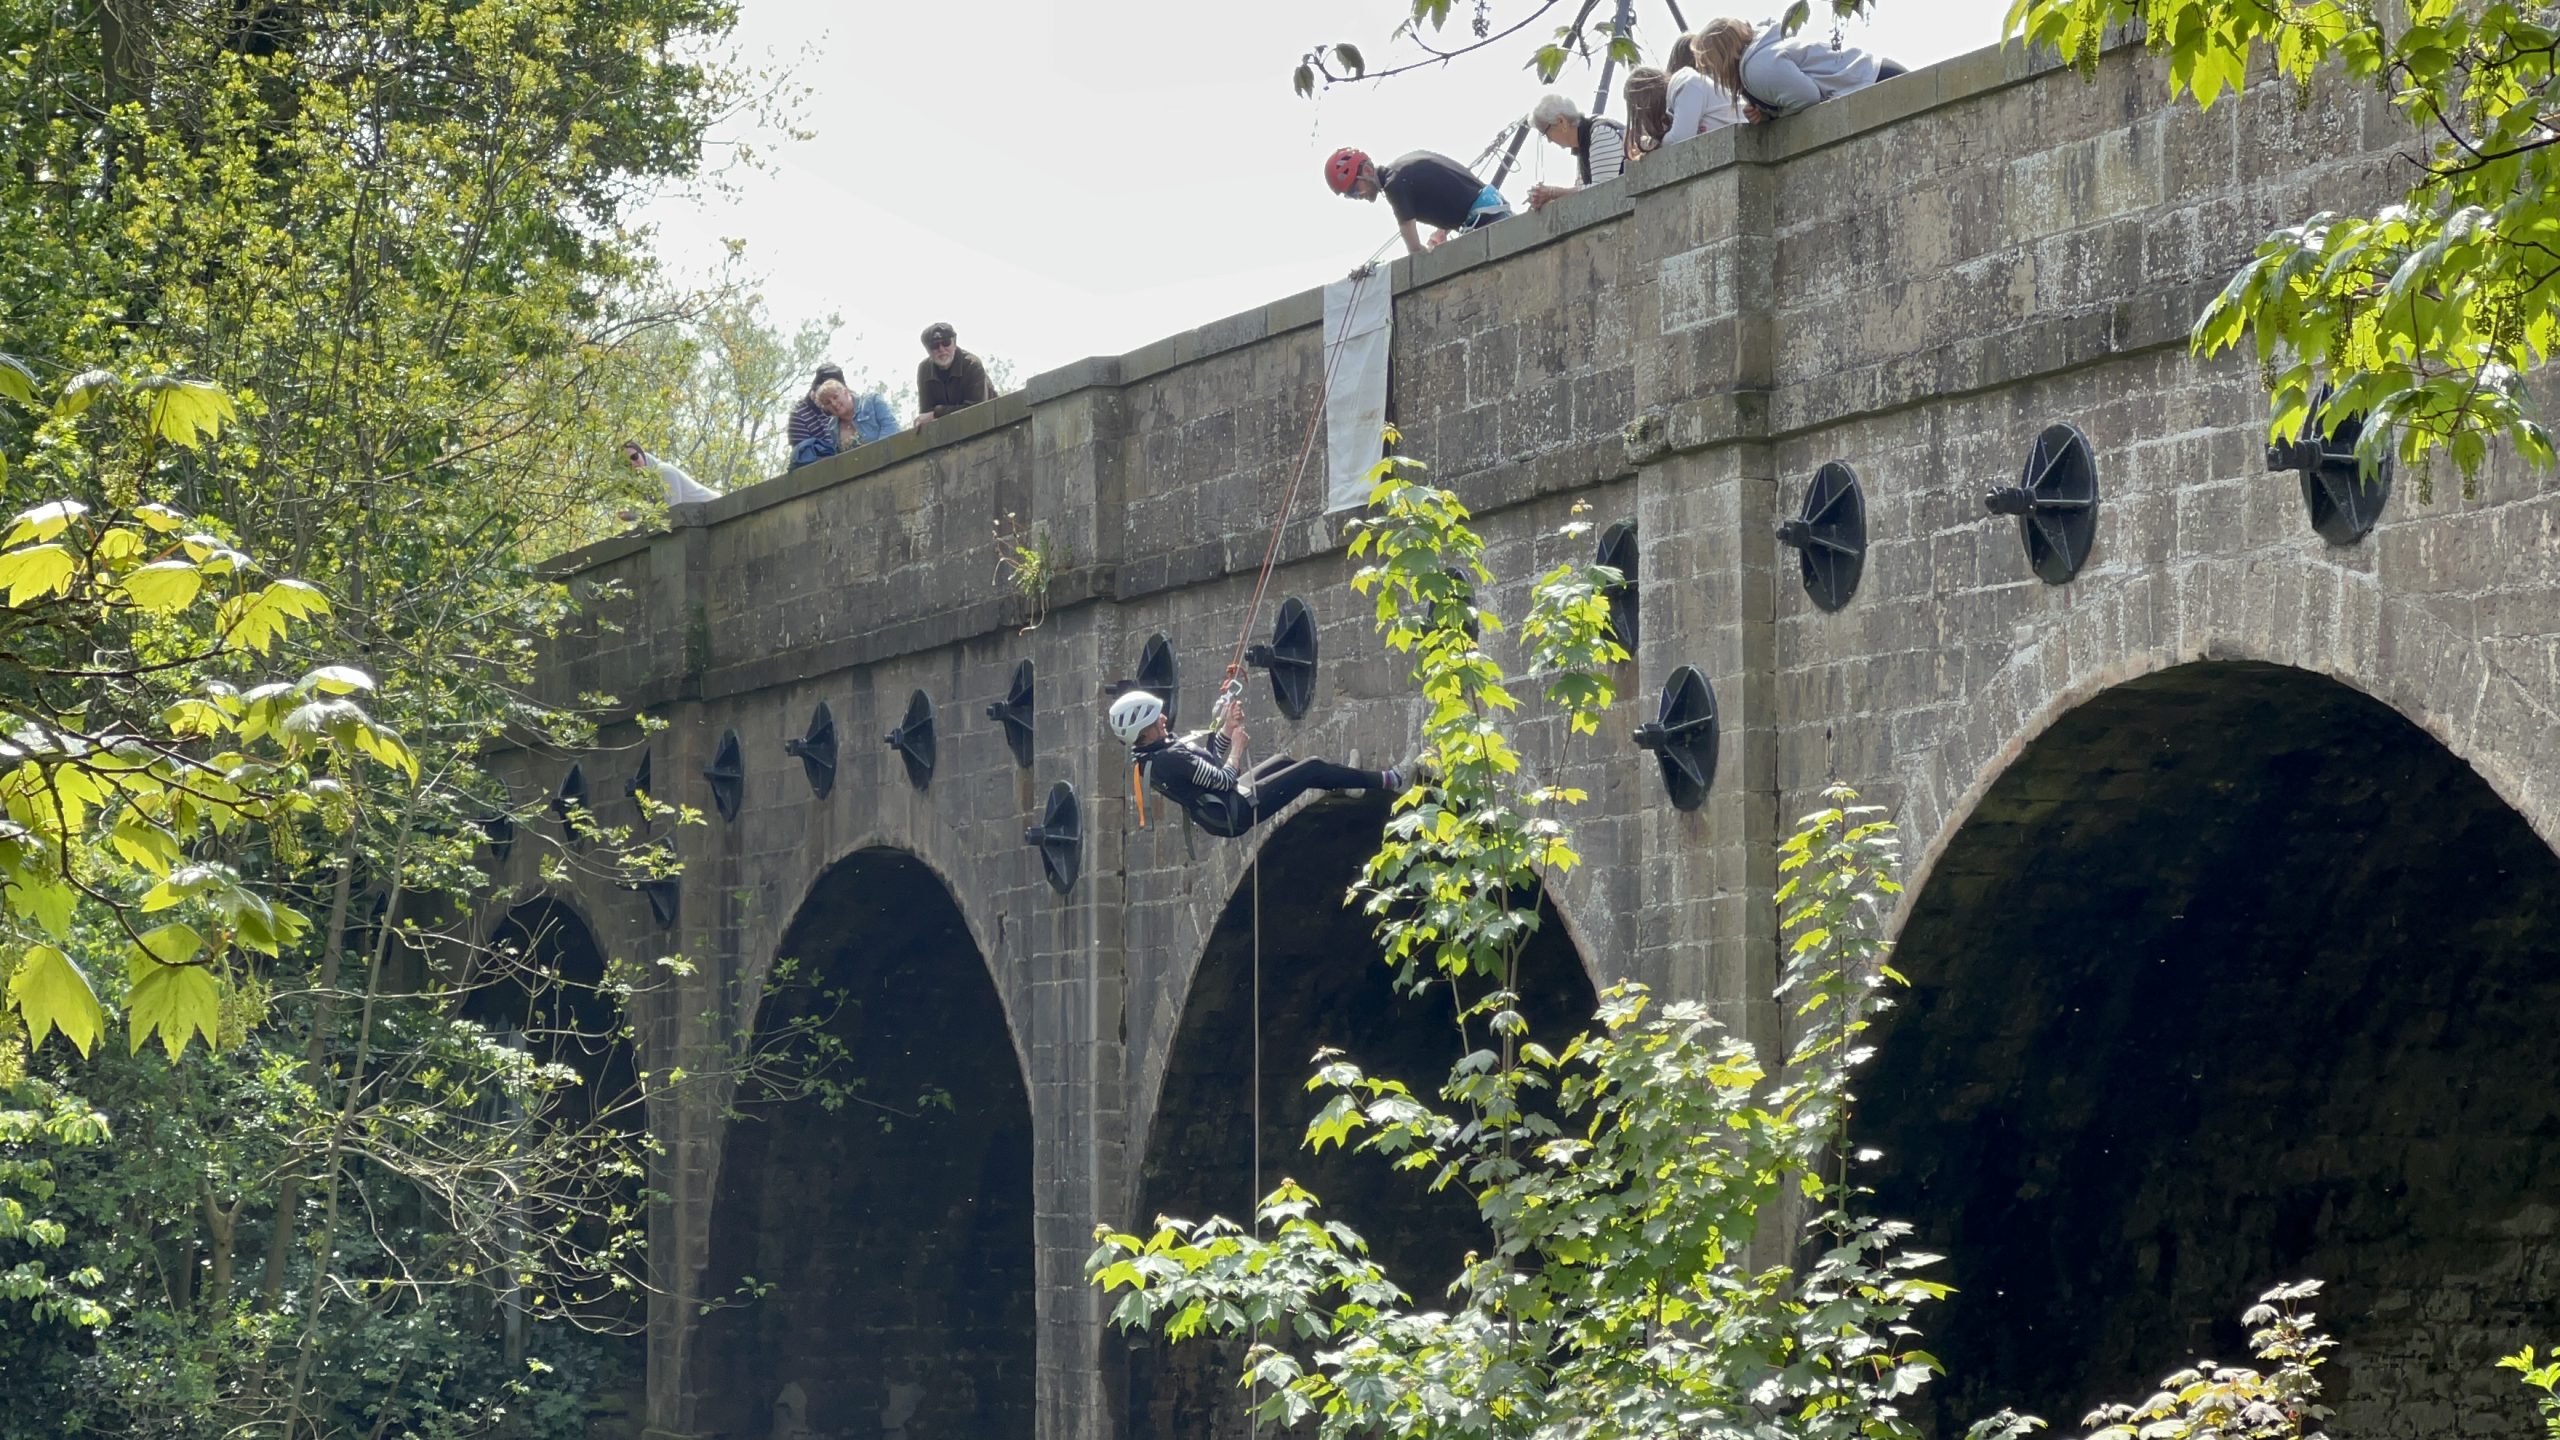 Mayor of Rushcliffe takes on the abseil challenge off Kings Mill Viaduct on Sunday to support her chosen charities scaled